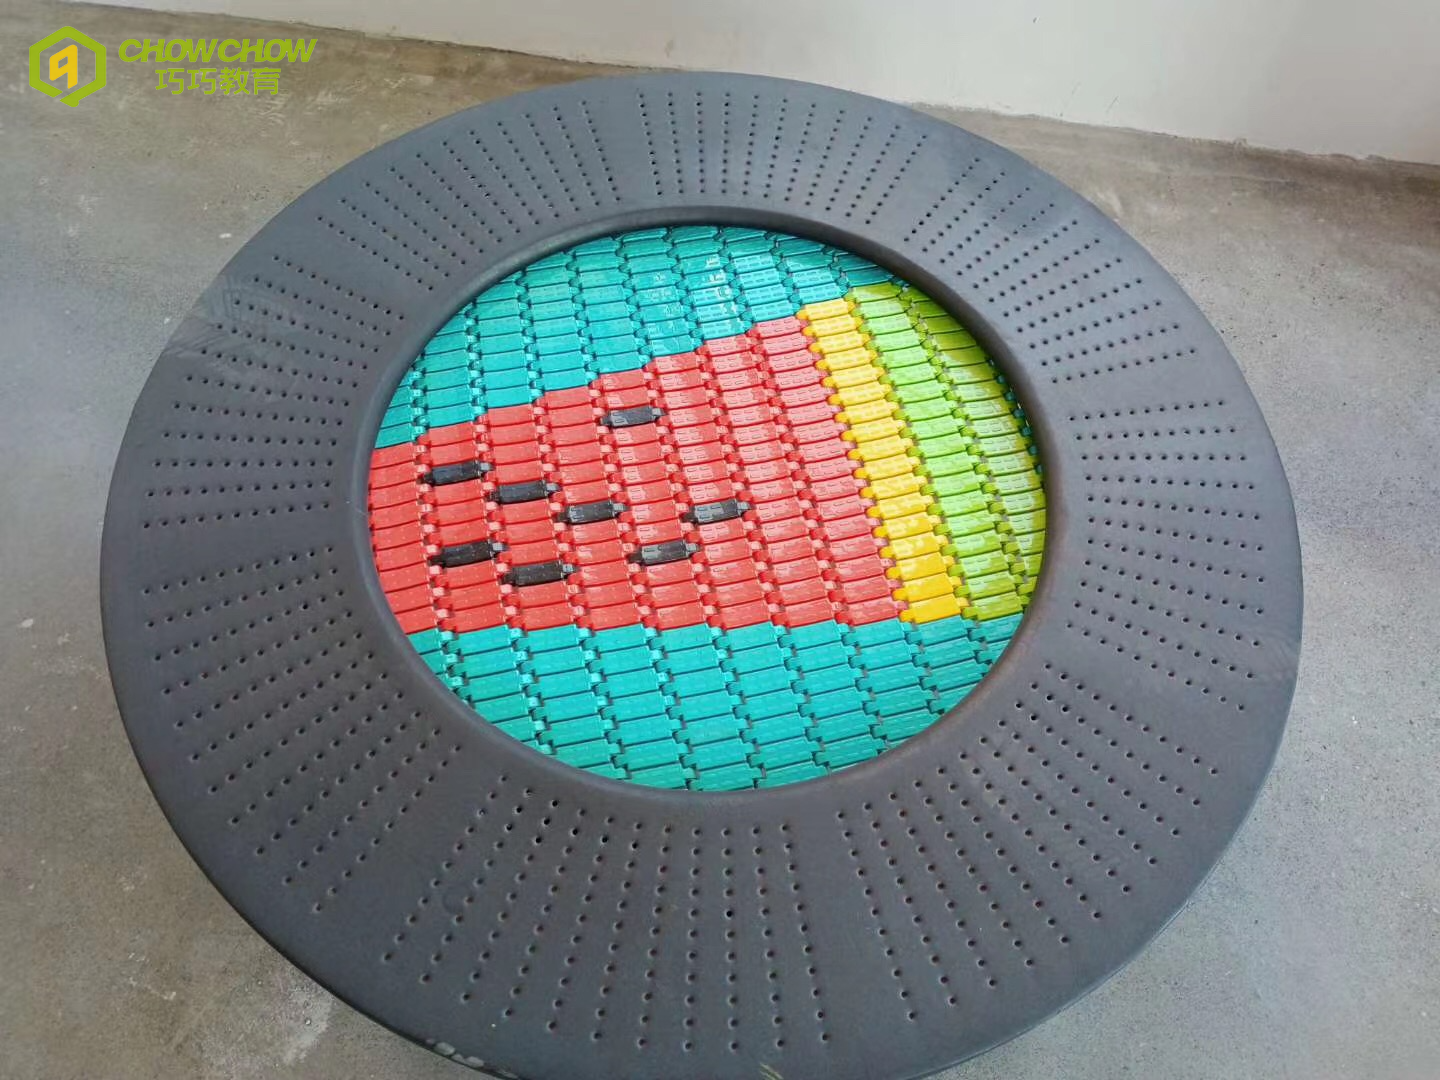 Qiaoqiao Kids Outdoor And Indoor Trampoline Playground Equipment for Sell